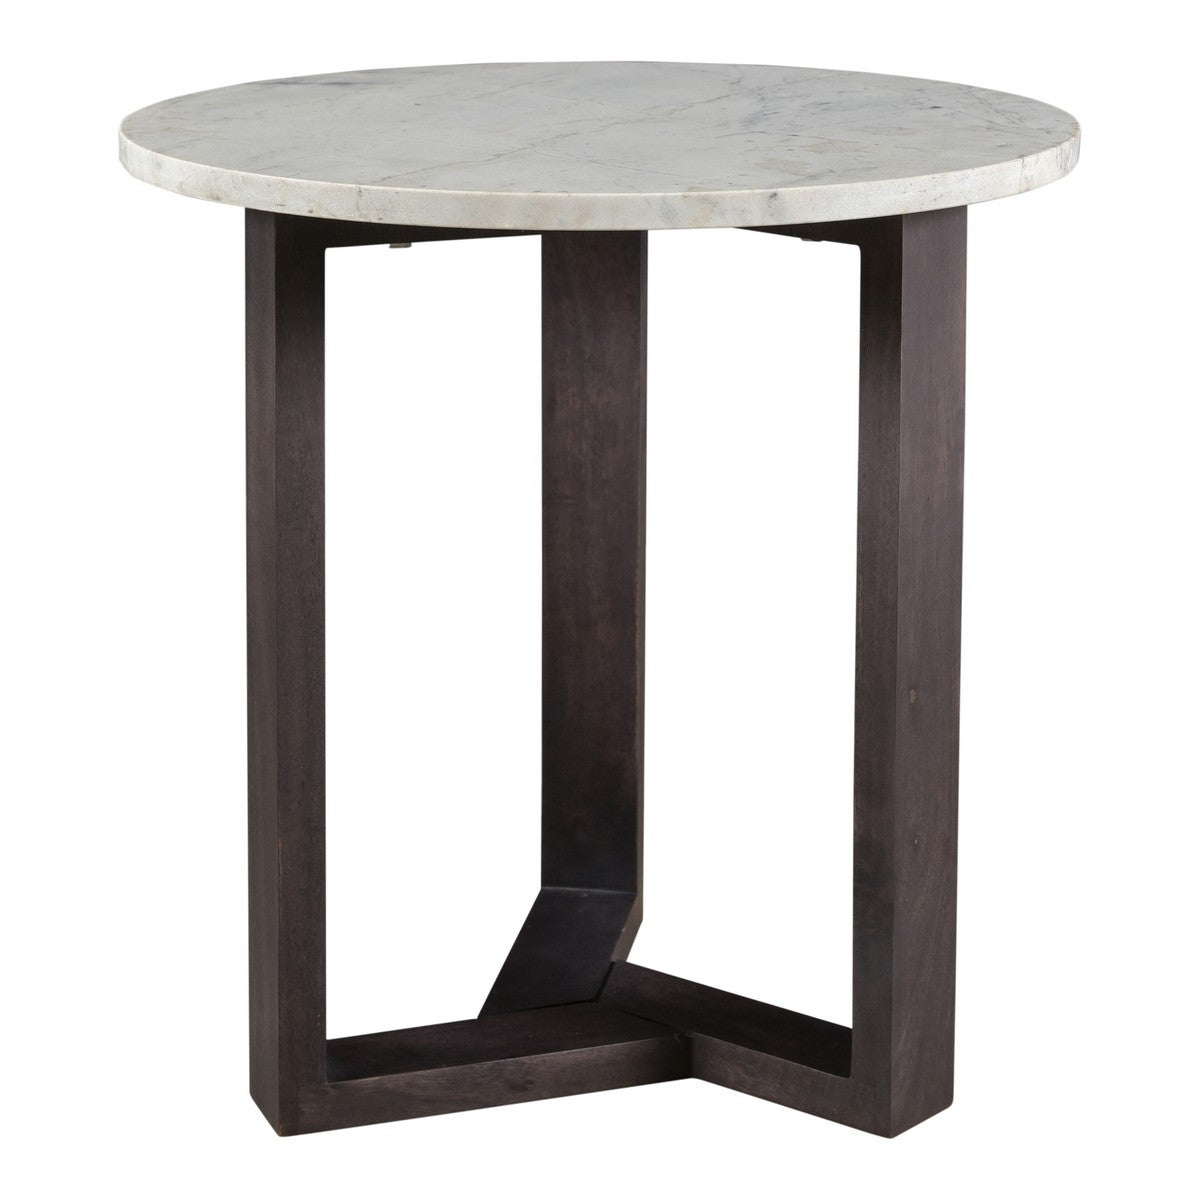 Moe's Home Collection Jinxx Side Table Charcoal Grey - JD-1019-07 - Moe's Home Collection - End Tables - Minimal And Modern - 1